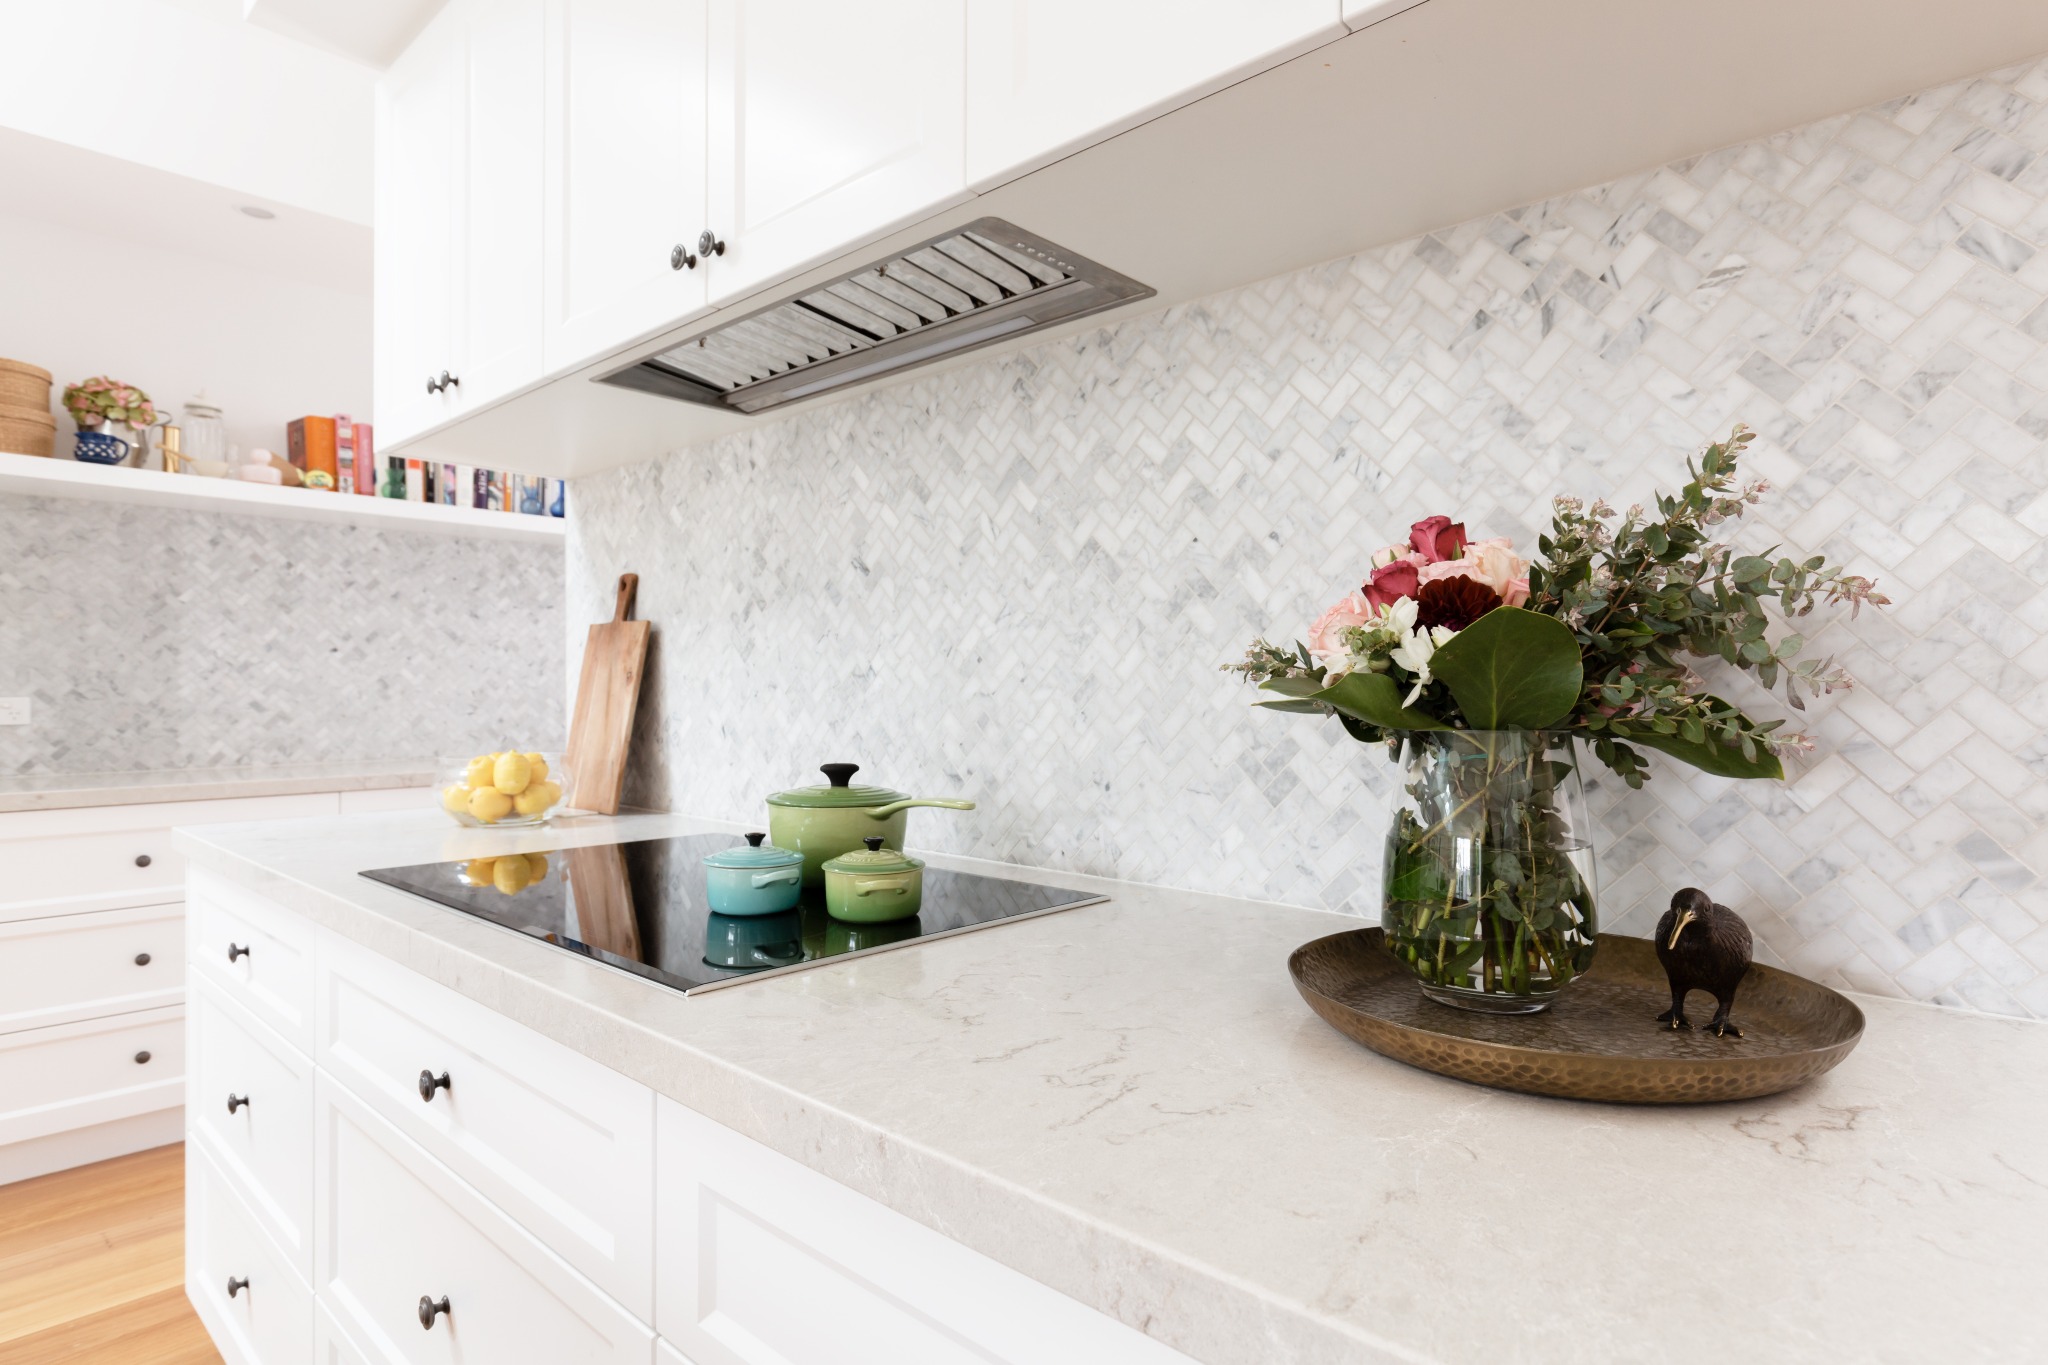 A bright white kitchen with heated counters. Styled with flowers.